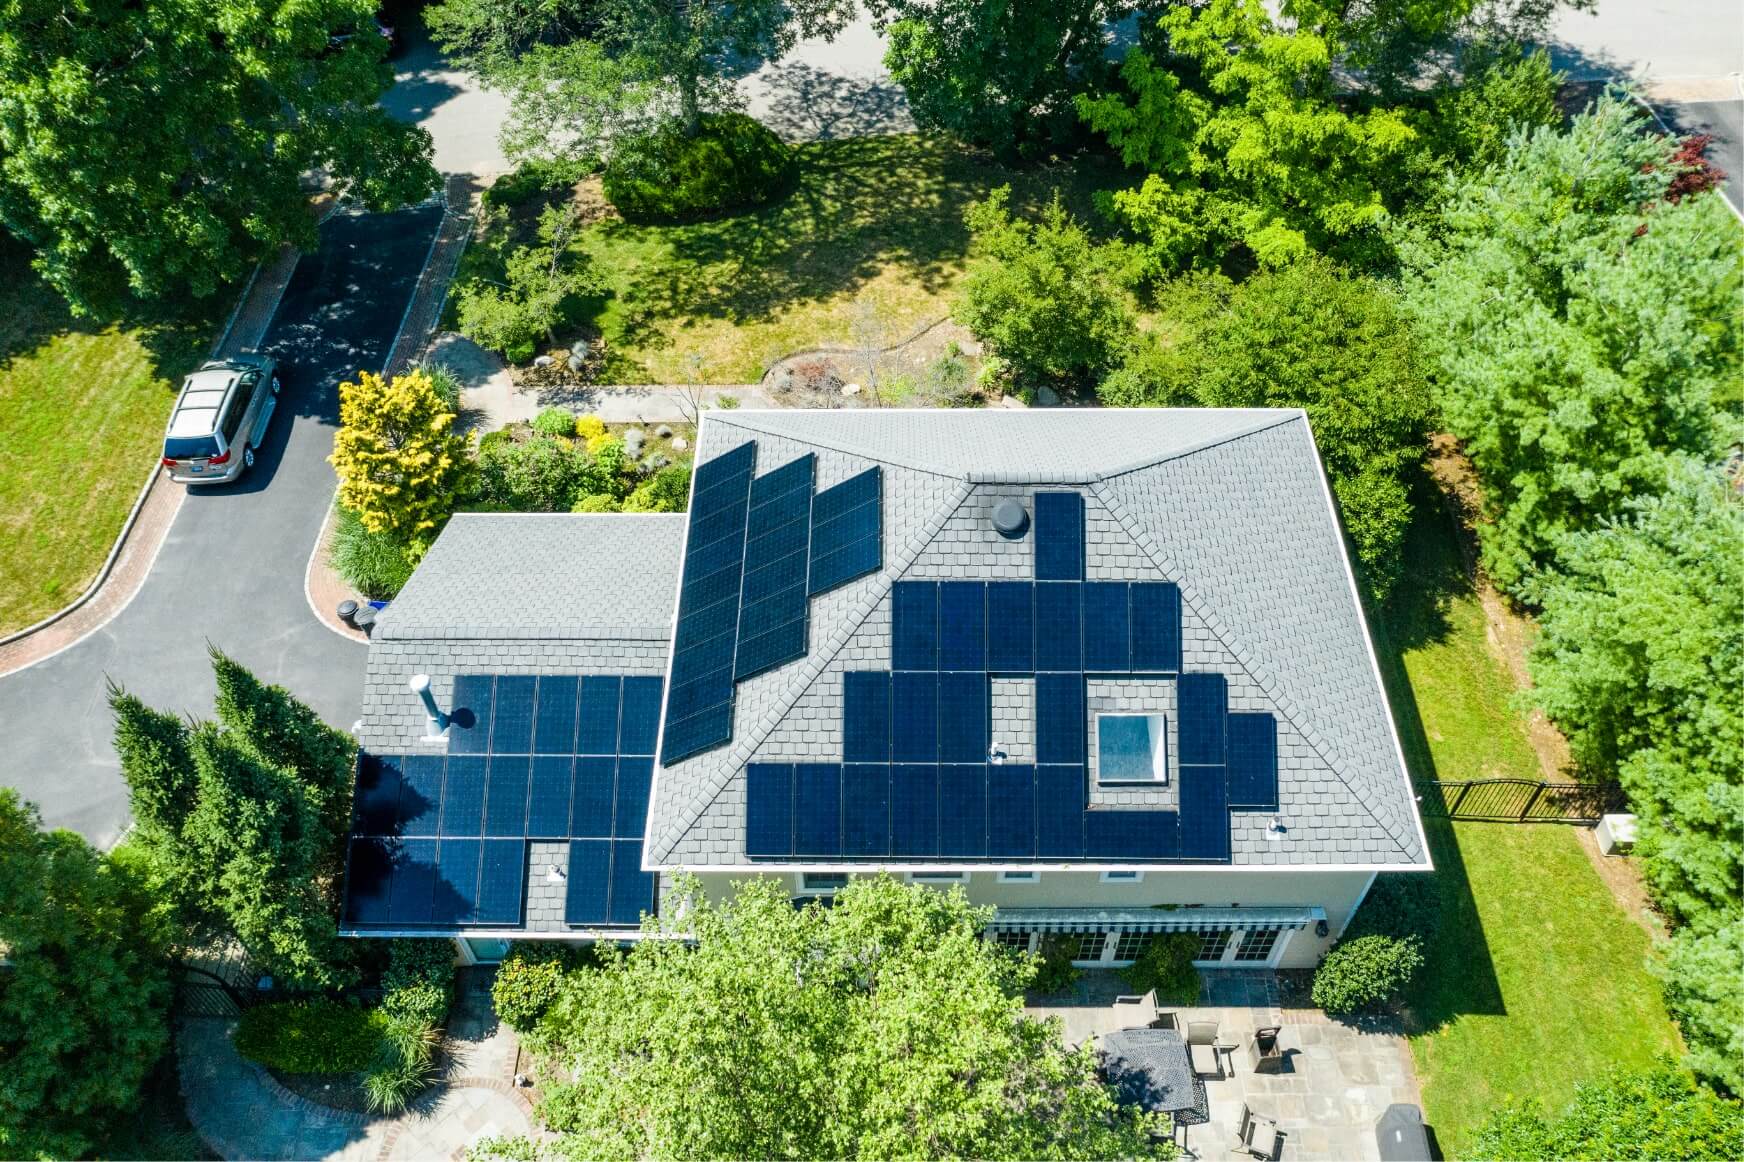 Solar Panels on Roof of House